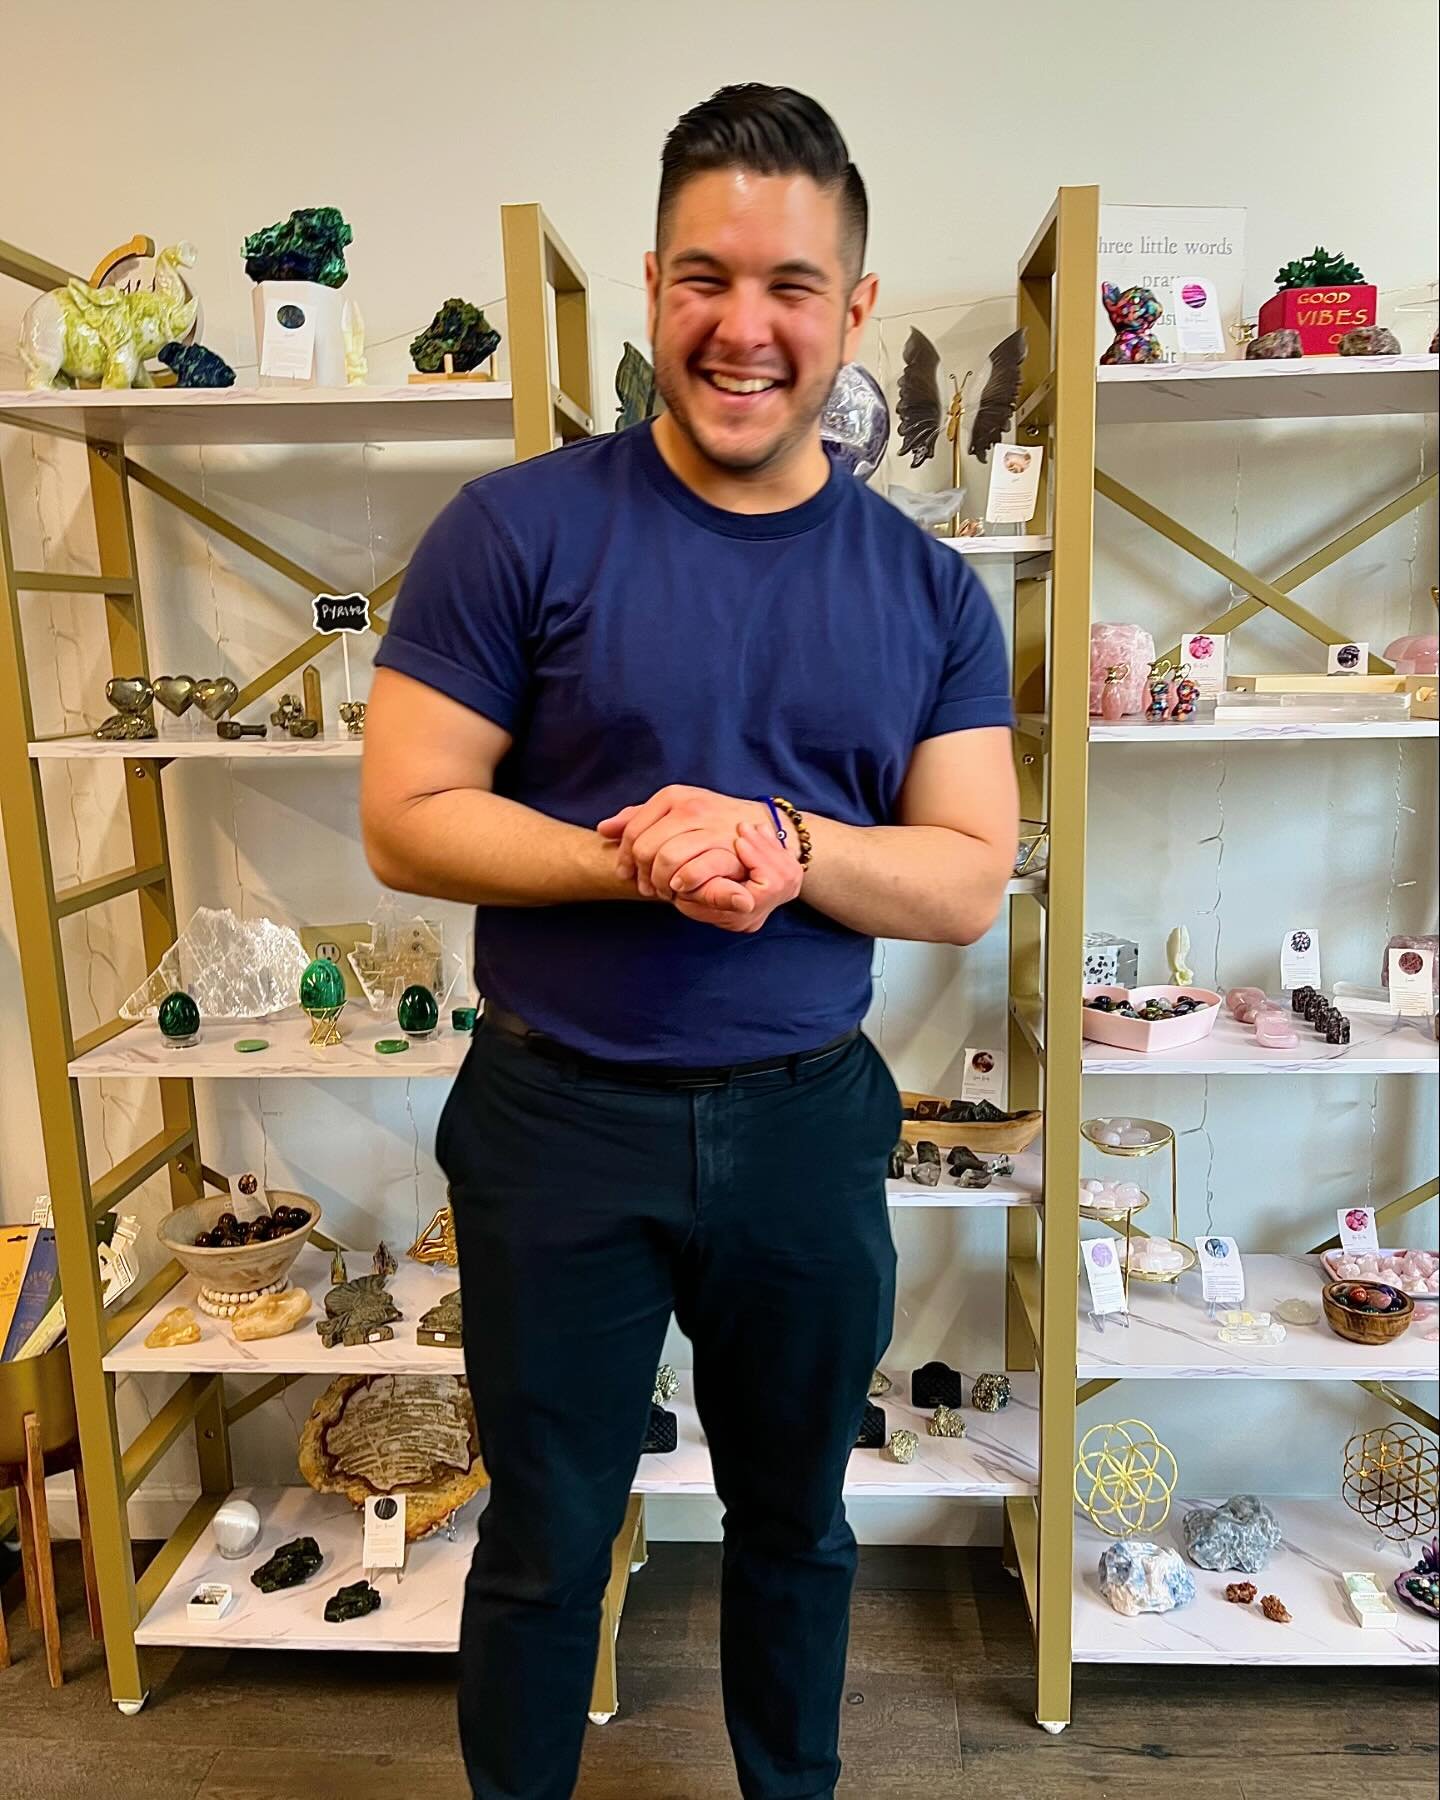 First day at Earth Angel Crystal was a success! 👏🏼✨ Follow @daisy.earthangelcrystal to get the latest about my consultations and readings in person in New York City.